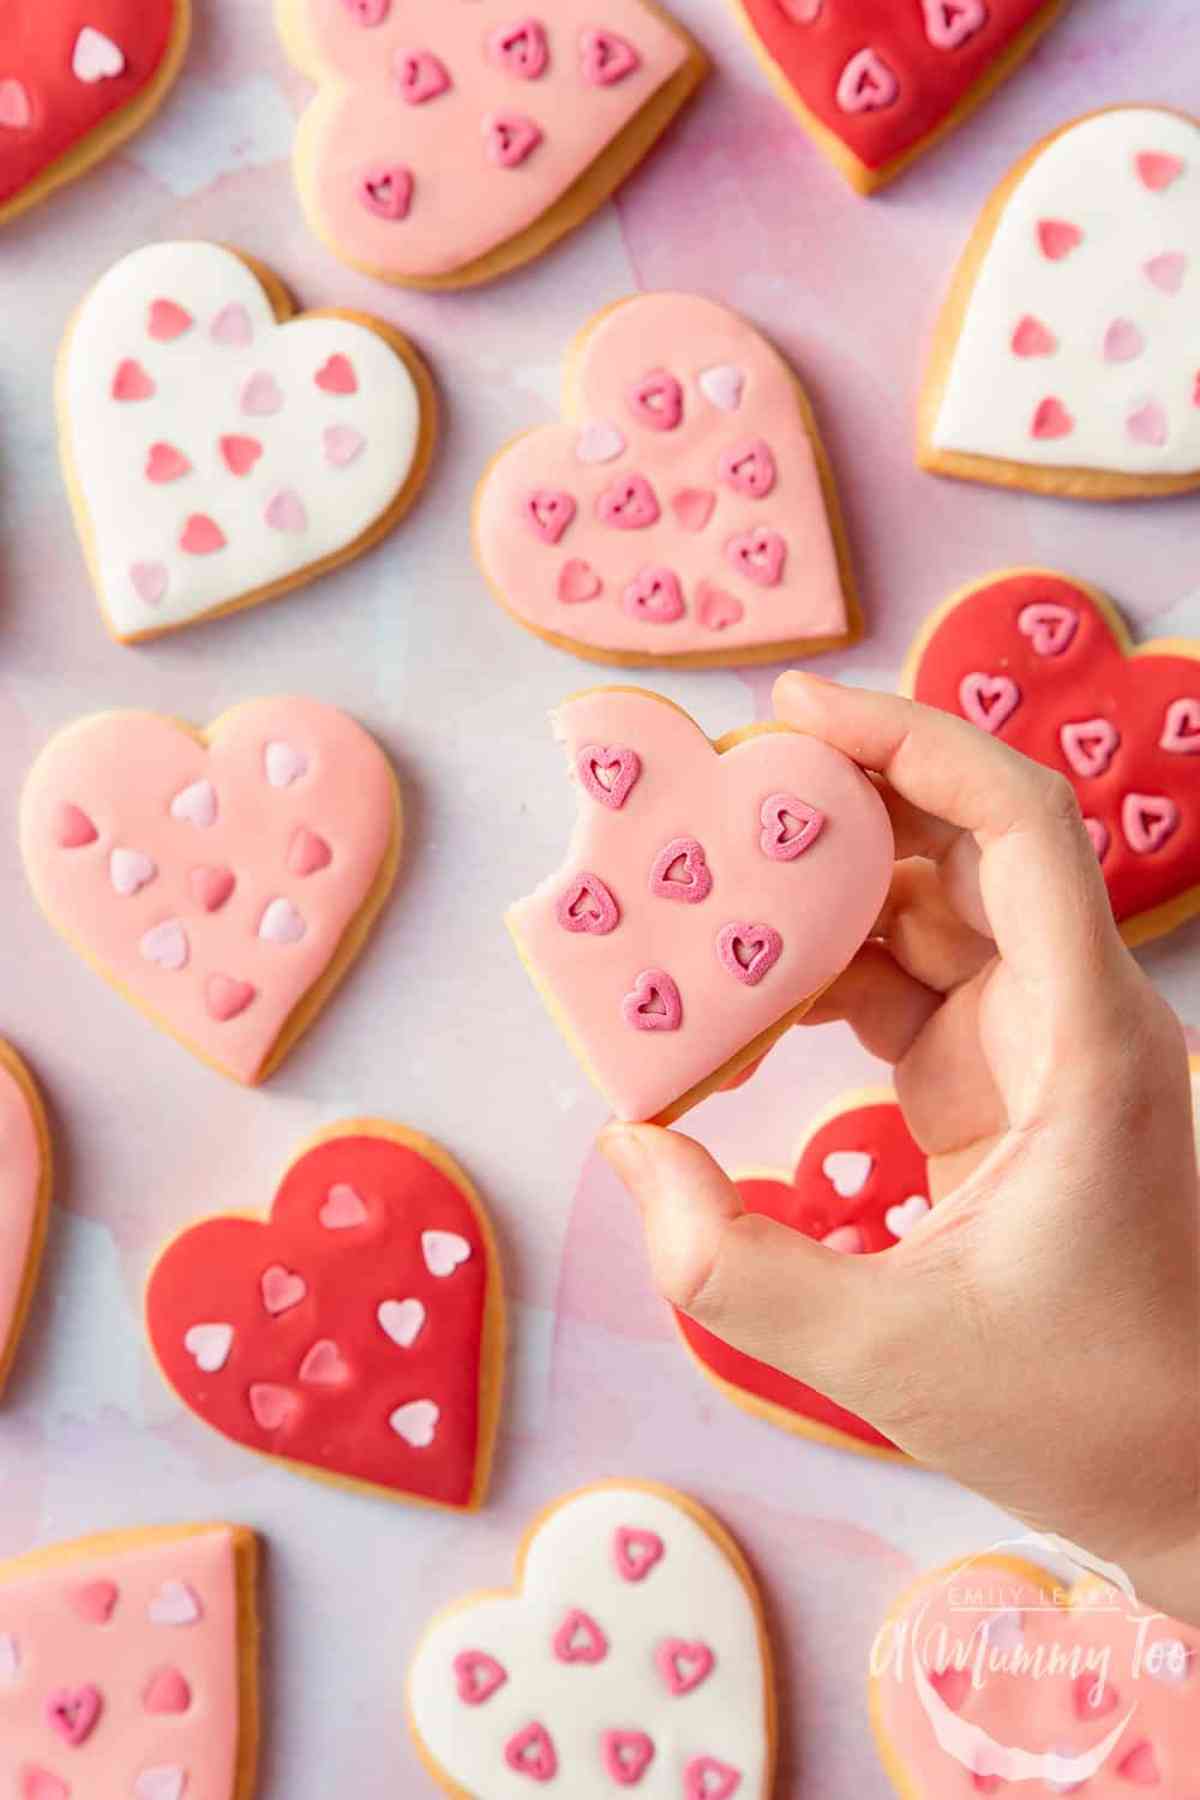 Pink, white and red heart shaped sugar cookies decorated with fondant and heart sprinkles.